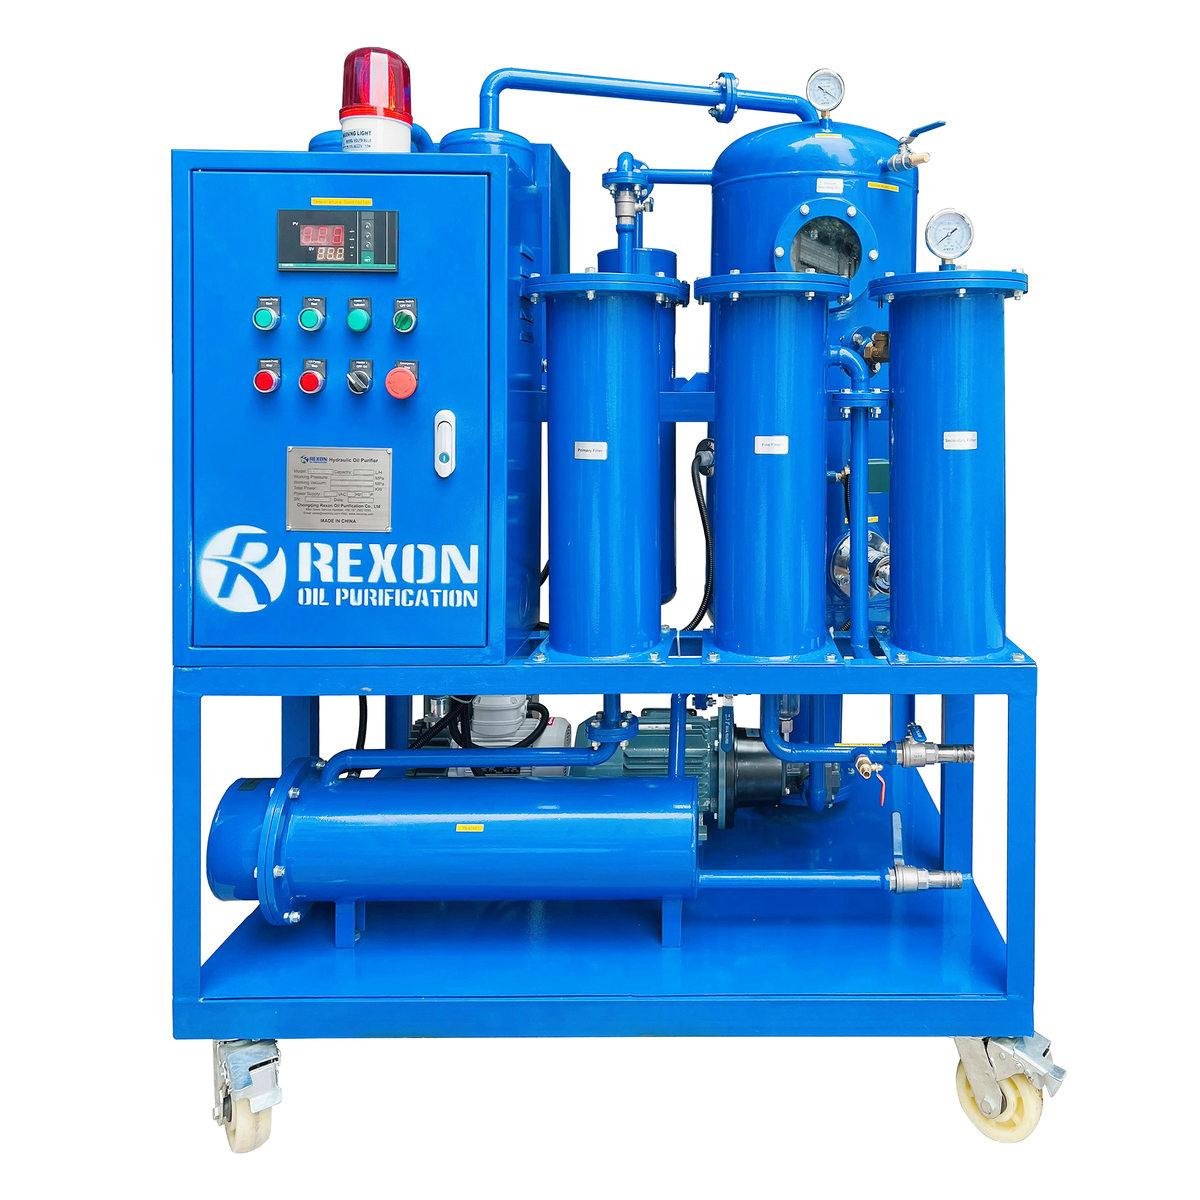 Lubricating Oil Purifier with Fast Oil Dehydration and Filtering System